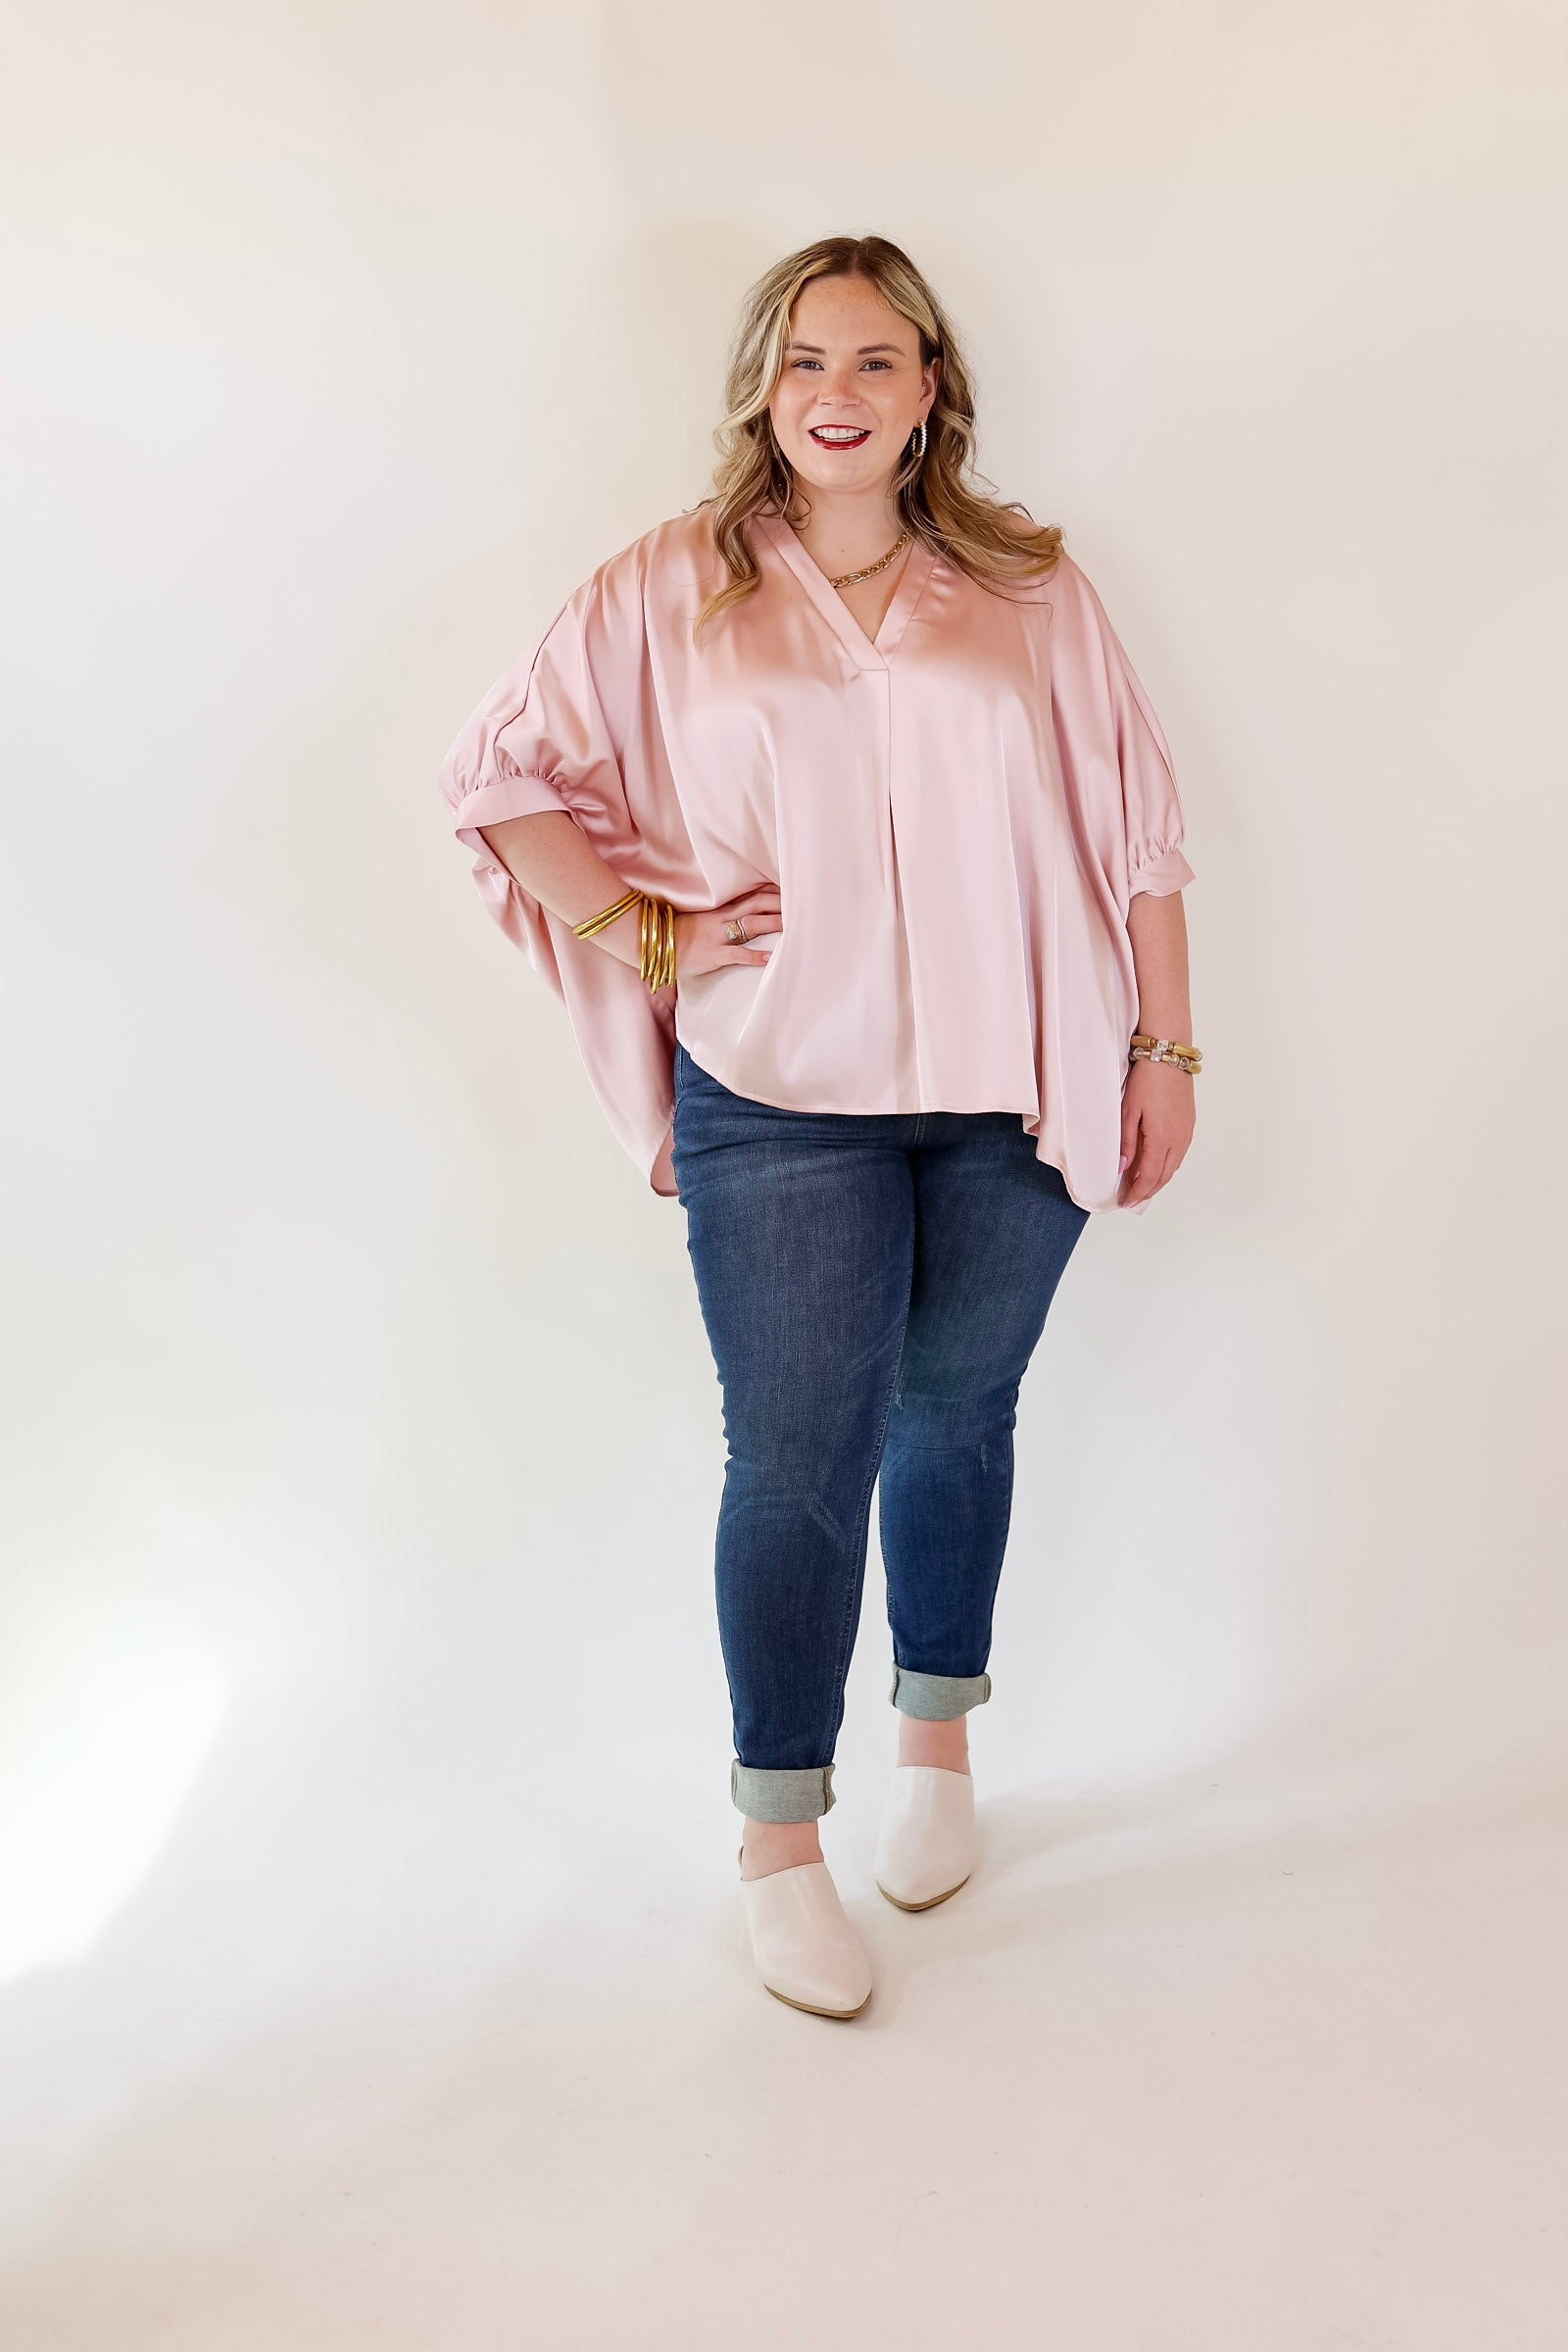 Irresistibly Chic Half Sleeve Oversized Blouse in Light Pink - Giddy Up Glamour Boutique